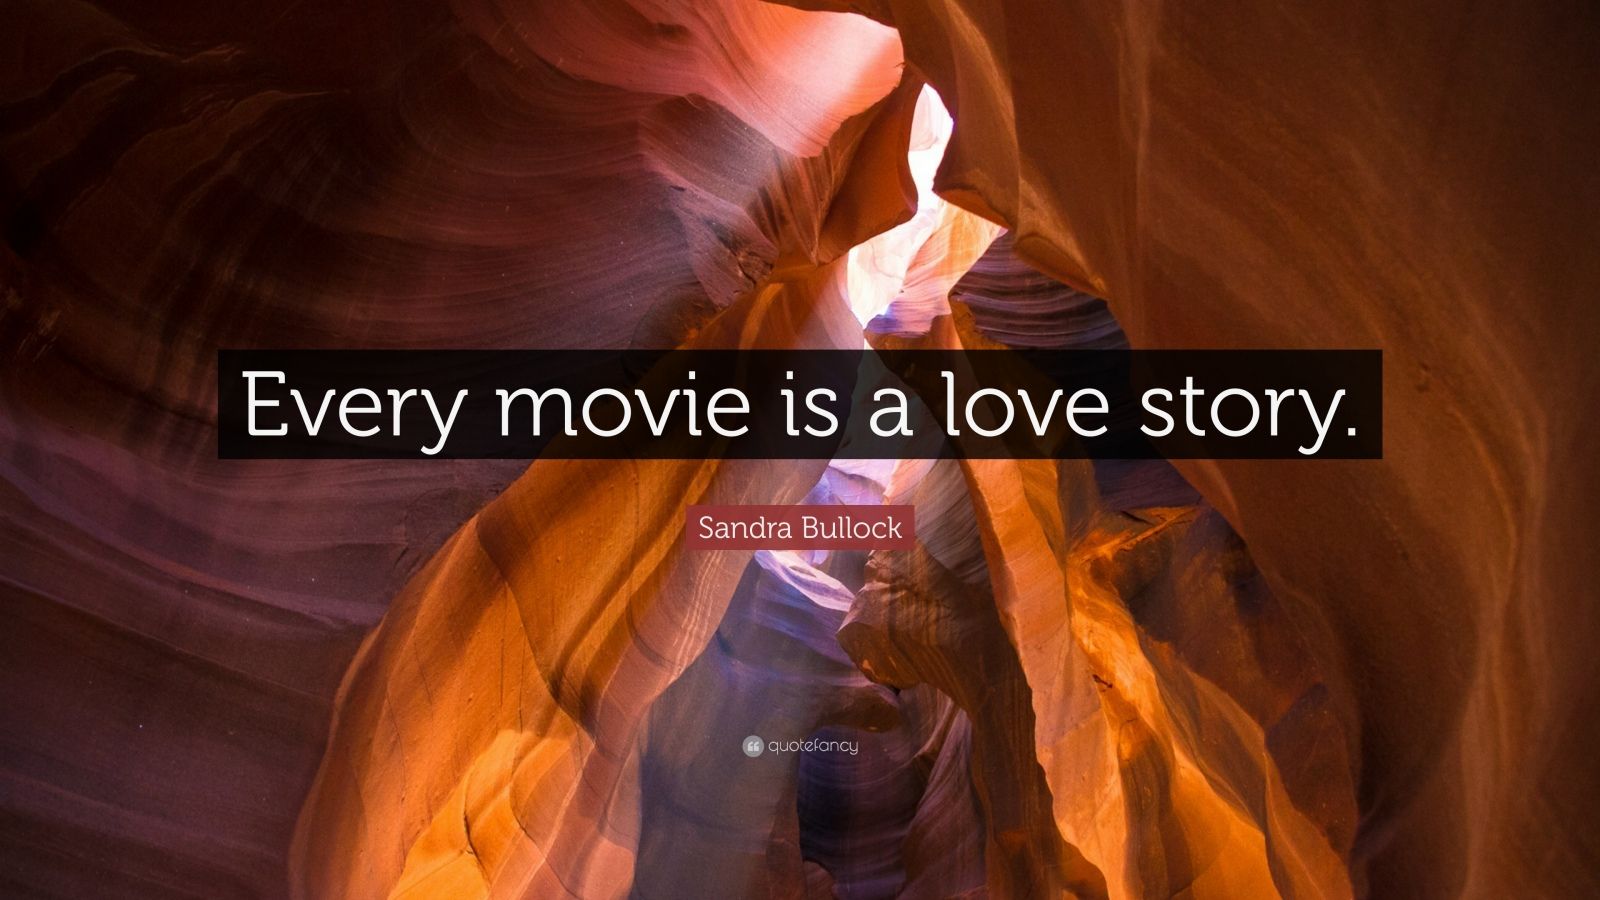 Sandra Bullock Quote “Every movie is a love story ”